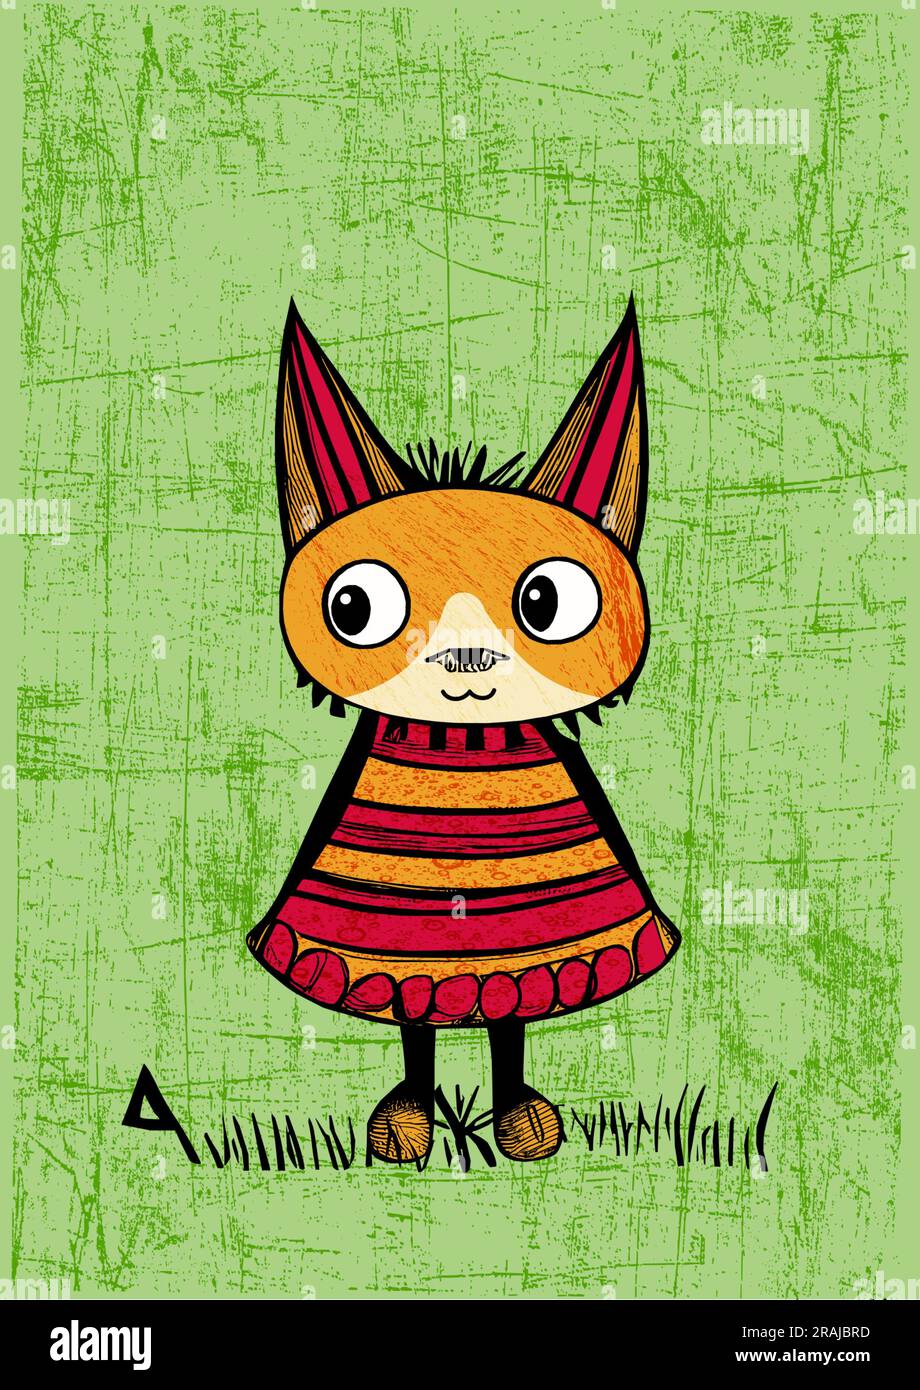 Adorable cat character illustration, perfect for children's books or kid-friendly web pages, finding inner peace amidst the vibrant grass Stock Photo